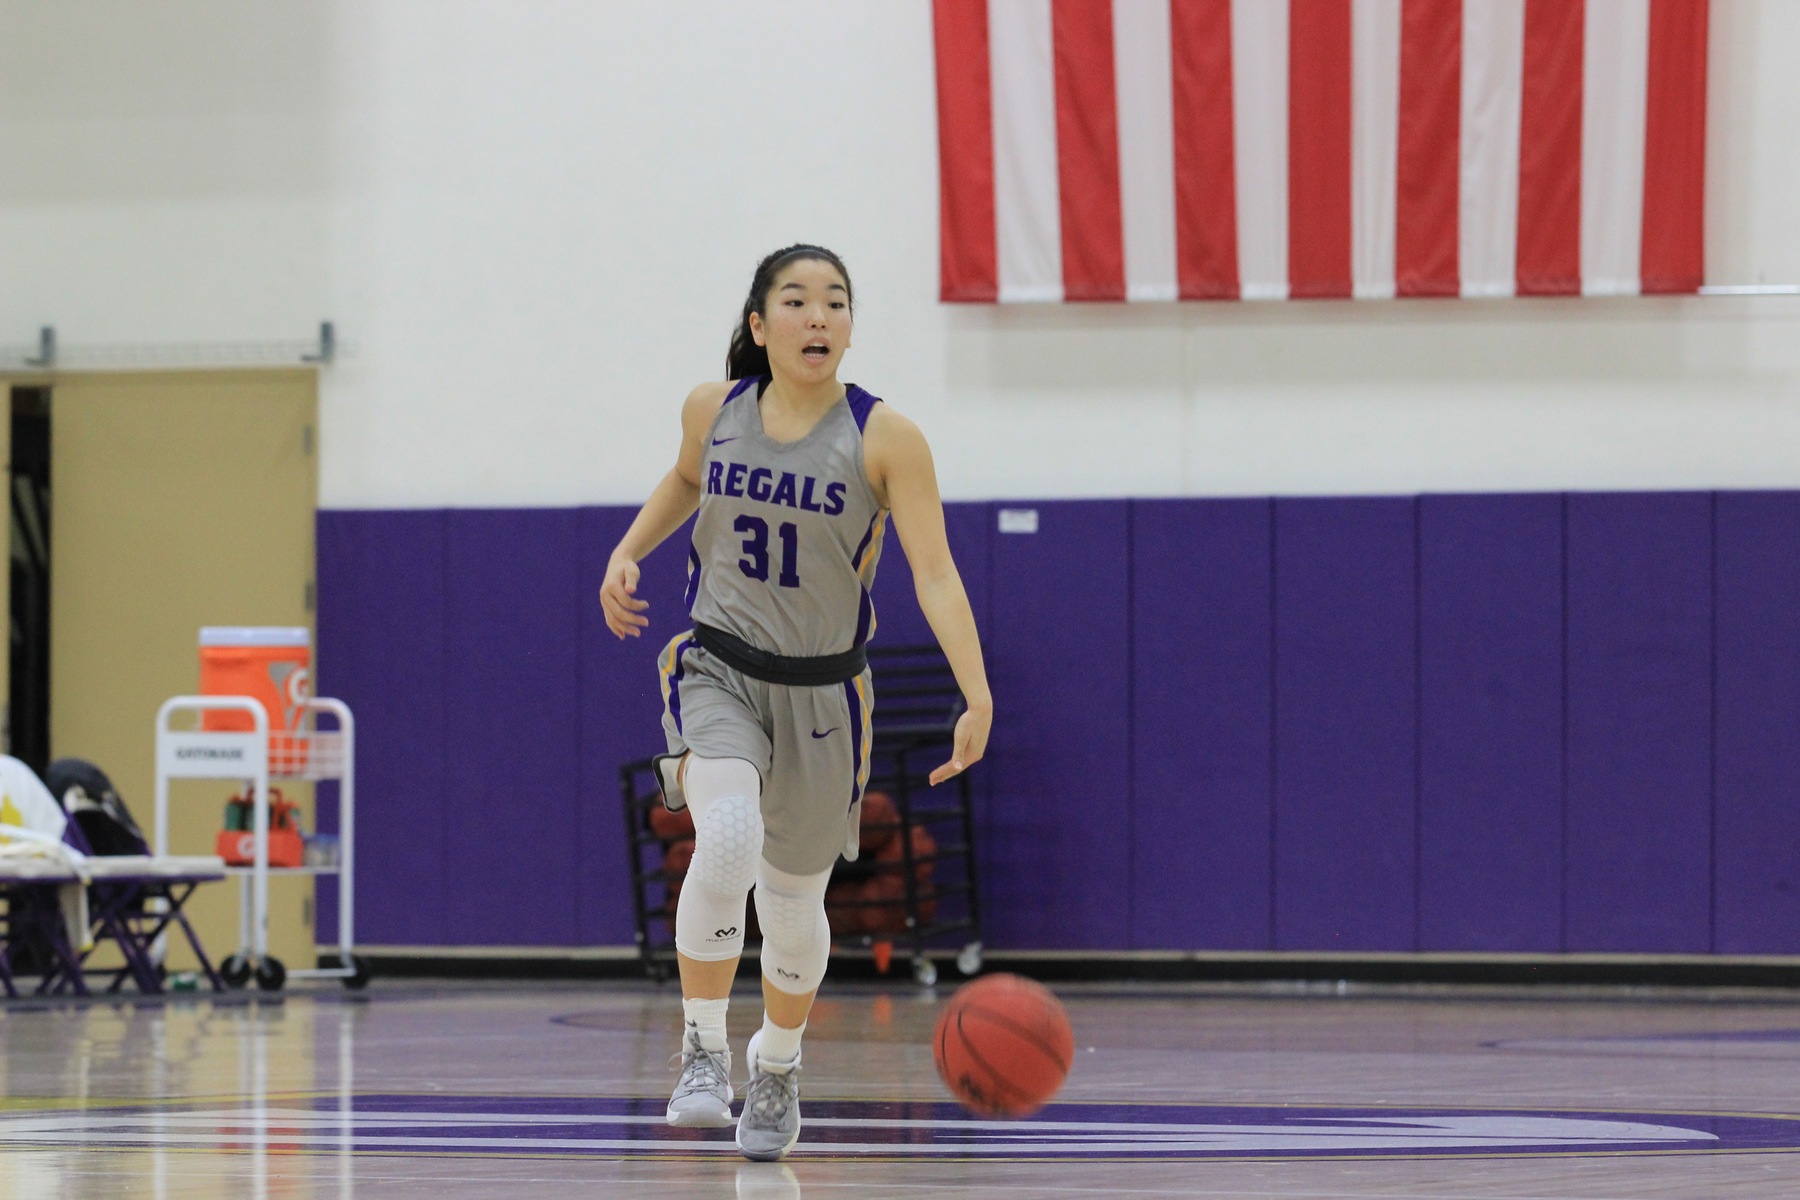 Mackenzy Iwahashi dropped 15 points on the night. (Photo Credit: Gabby Flores)